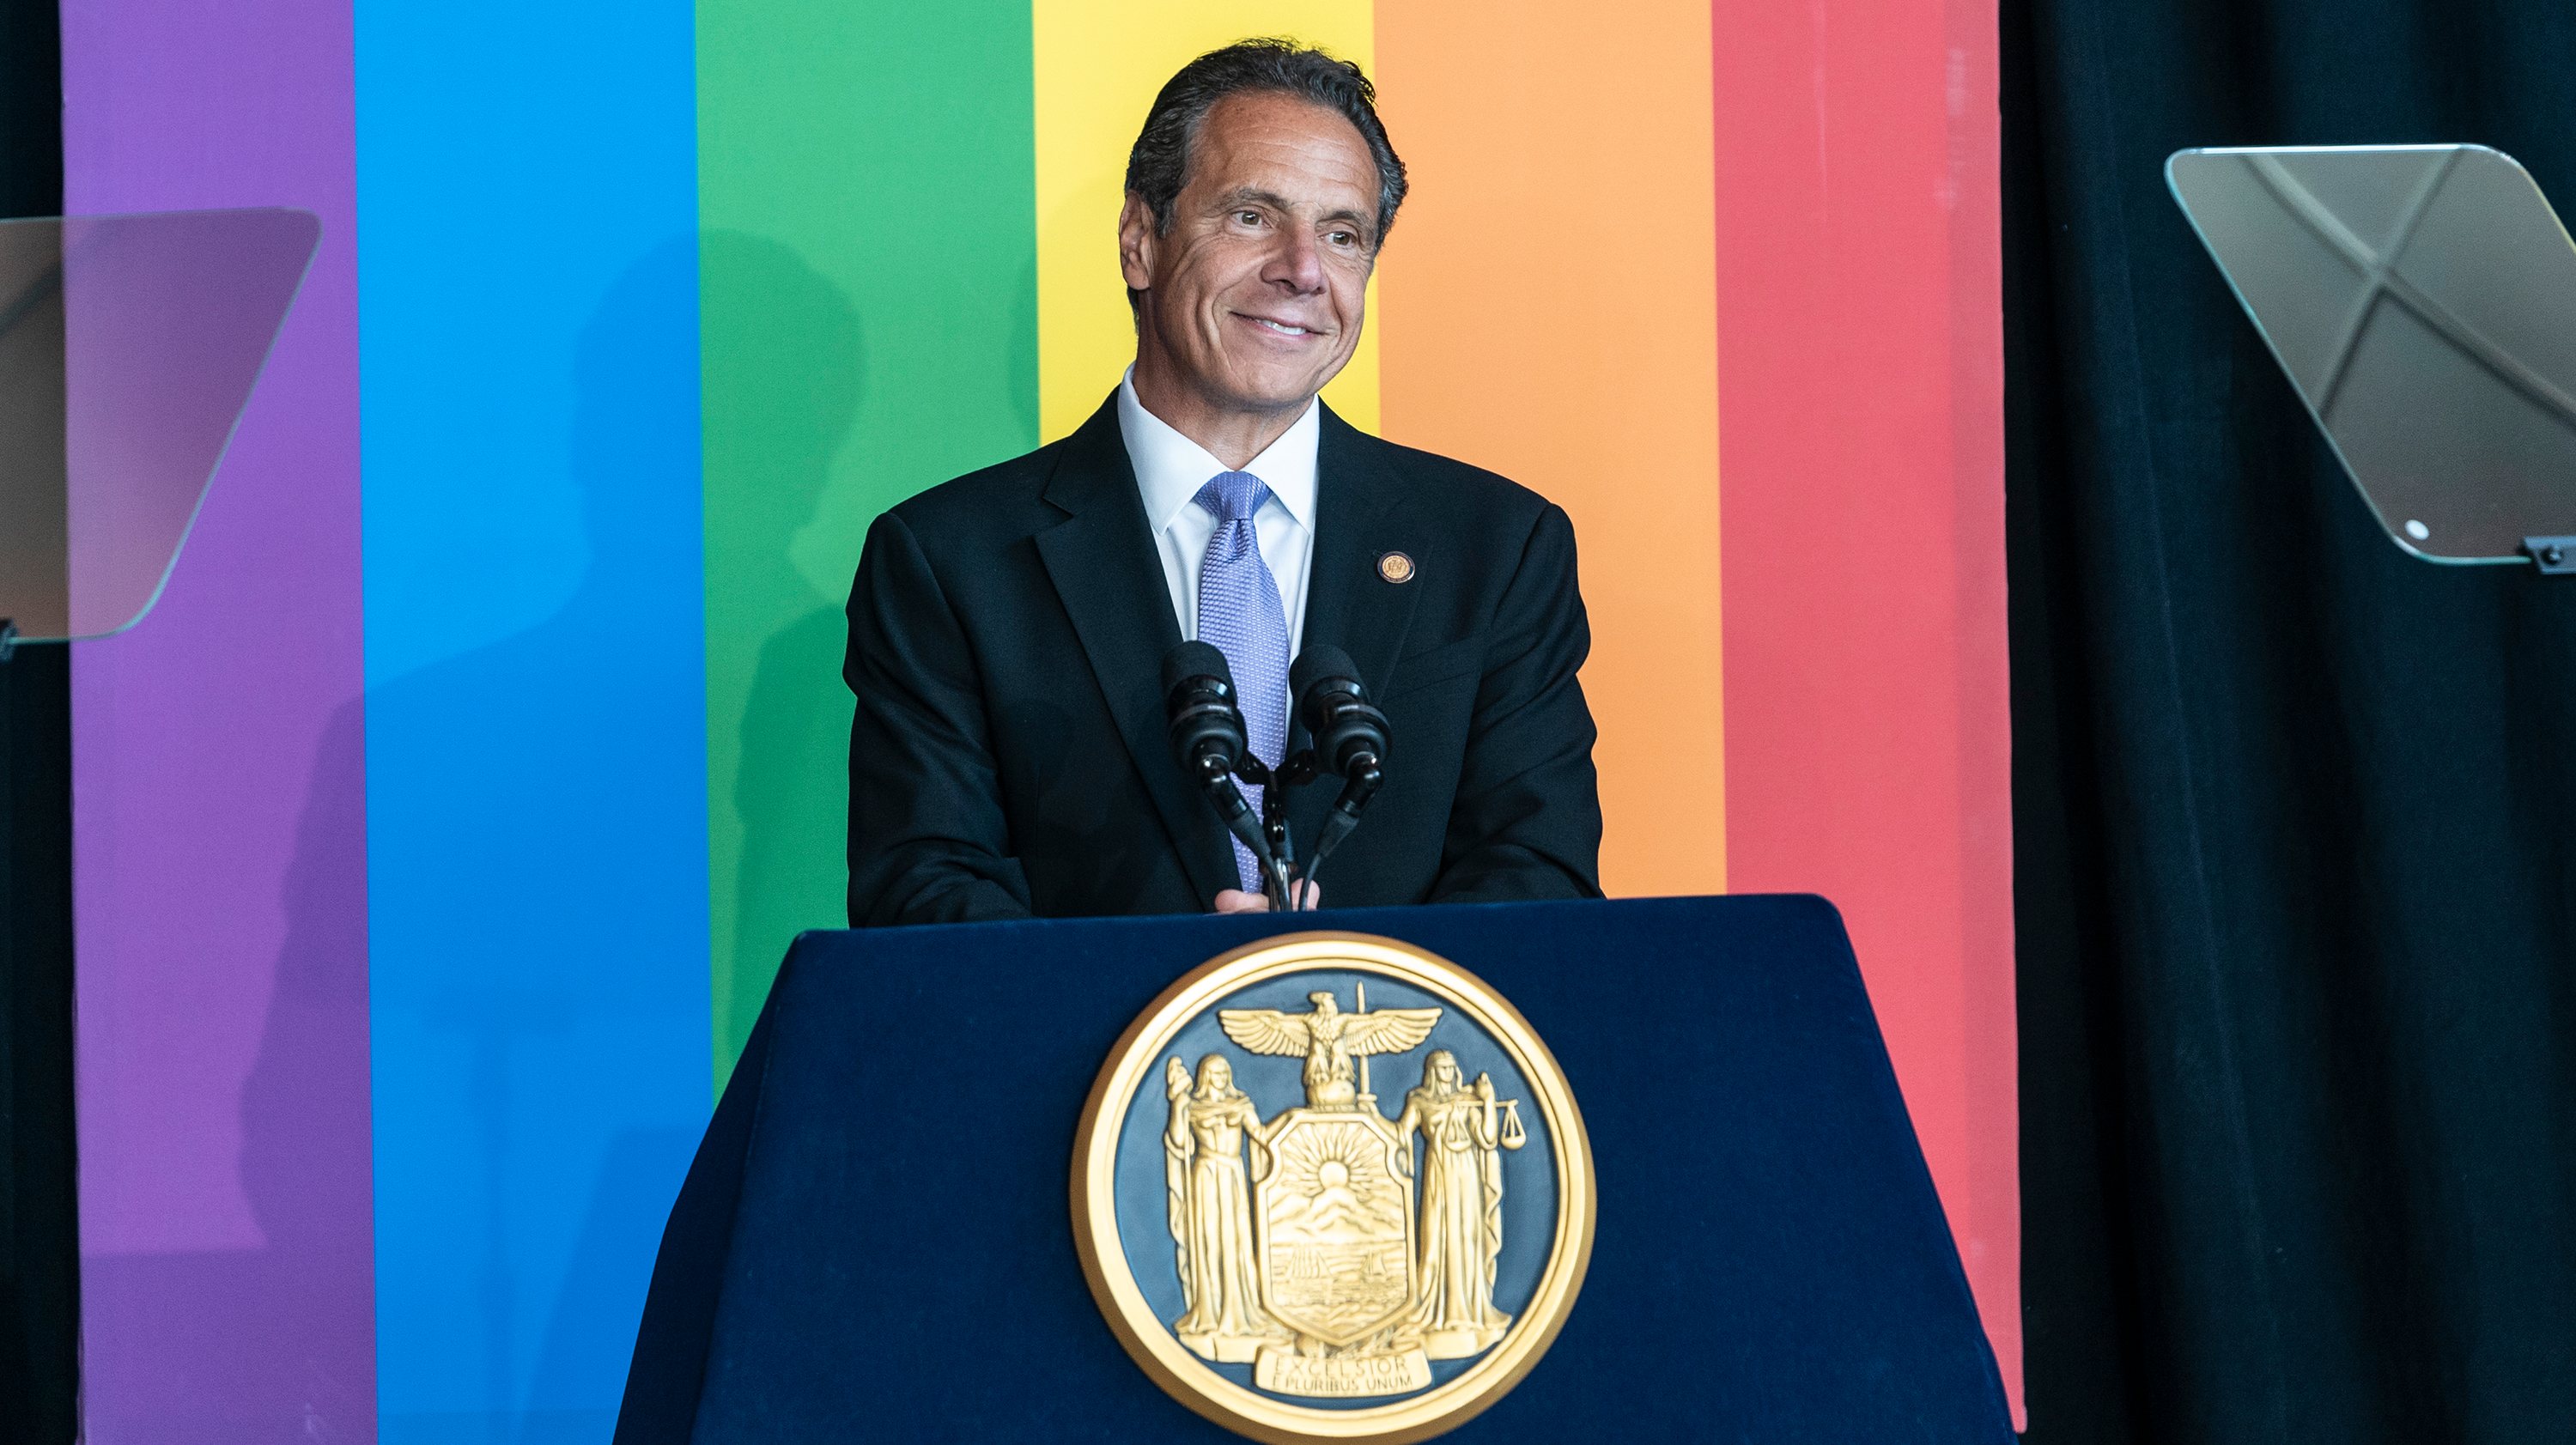 Governor Cuomo and members of LGBTQ community celebrate 10